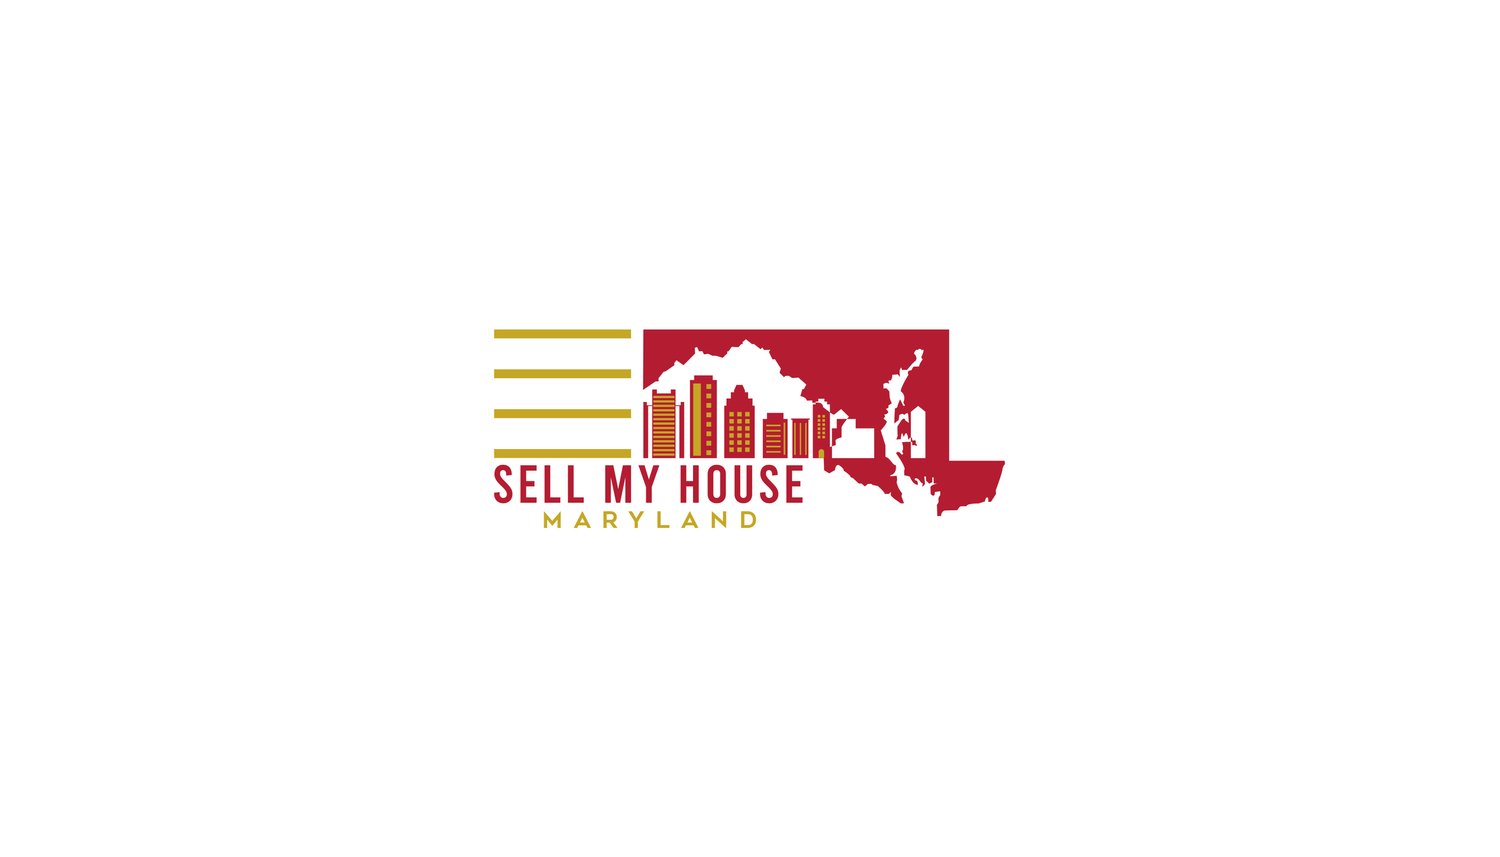 Sell My House Maryland & Nationwide USA | We Buy Houses Maryland | Sell House Cash MD | Cash for Houses MD | We Buy Houses Near Me